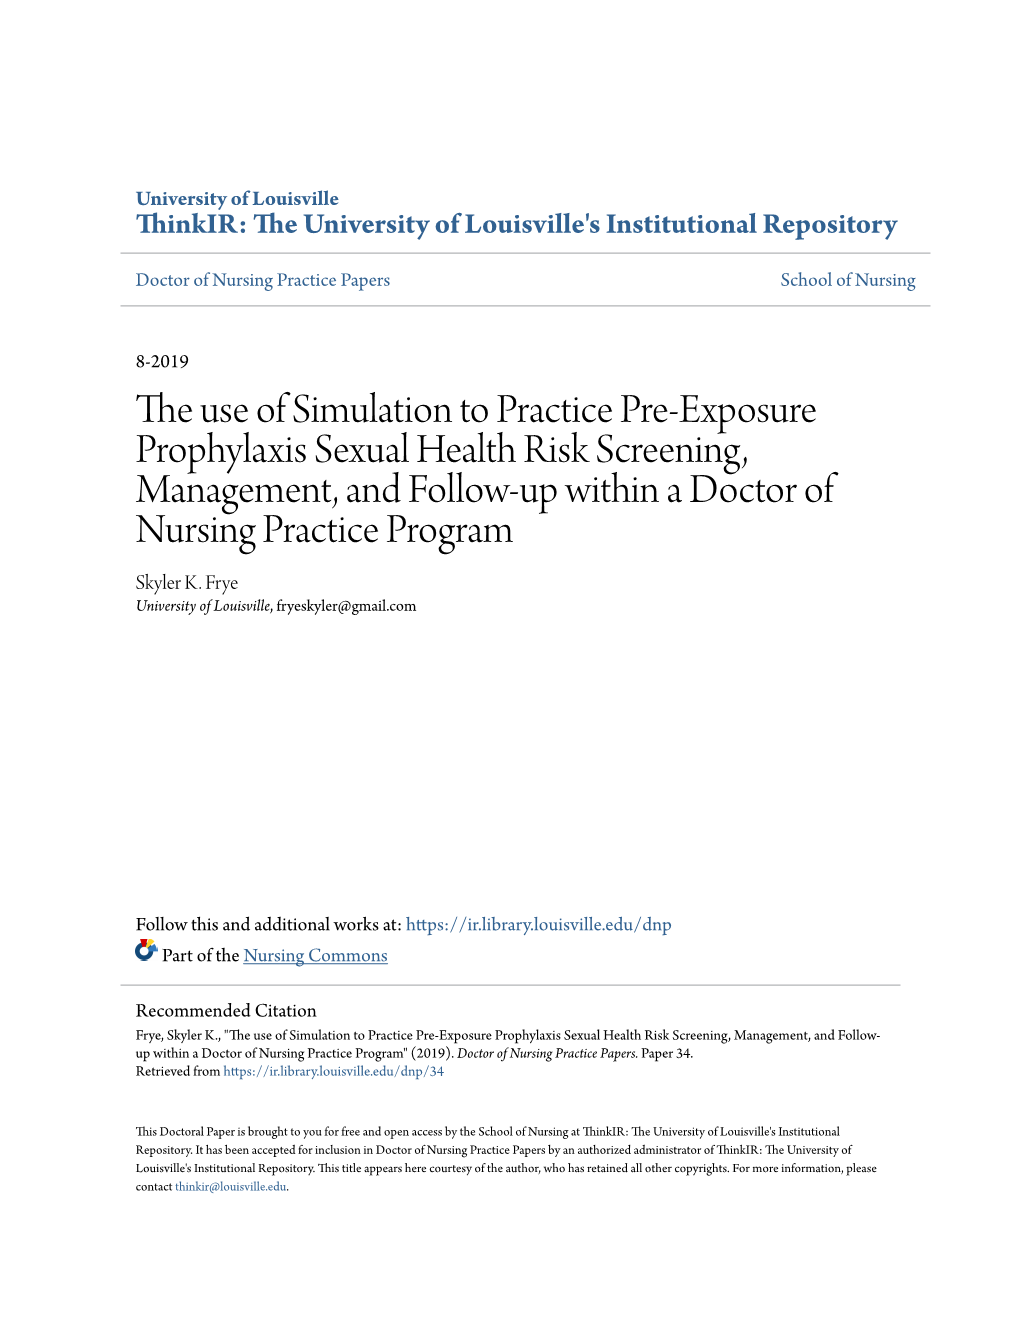 The Use of Simulation to Practice Pre-Exposure Prophylaxis Sexual